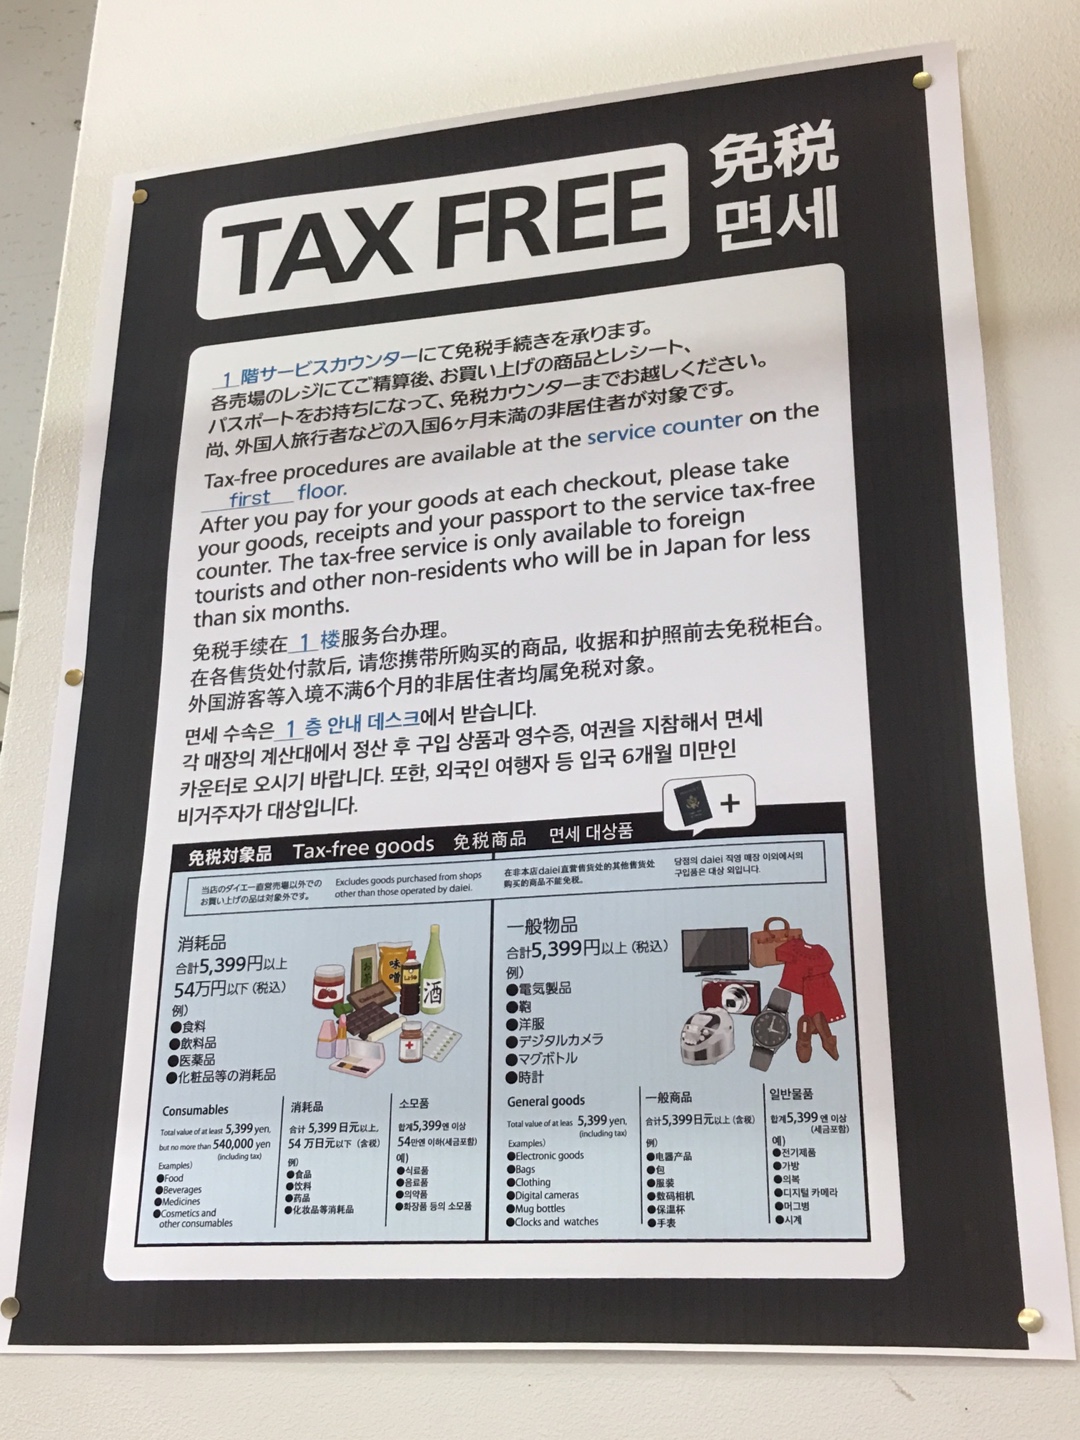 https://www.mamelingual.com/2018/02/01/after-taxrefound/